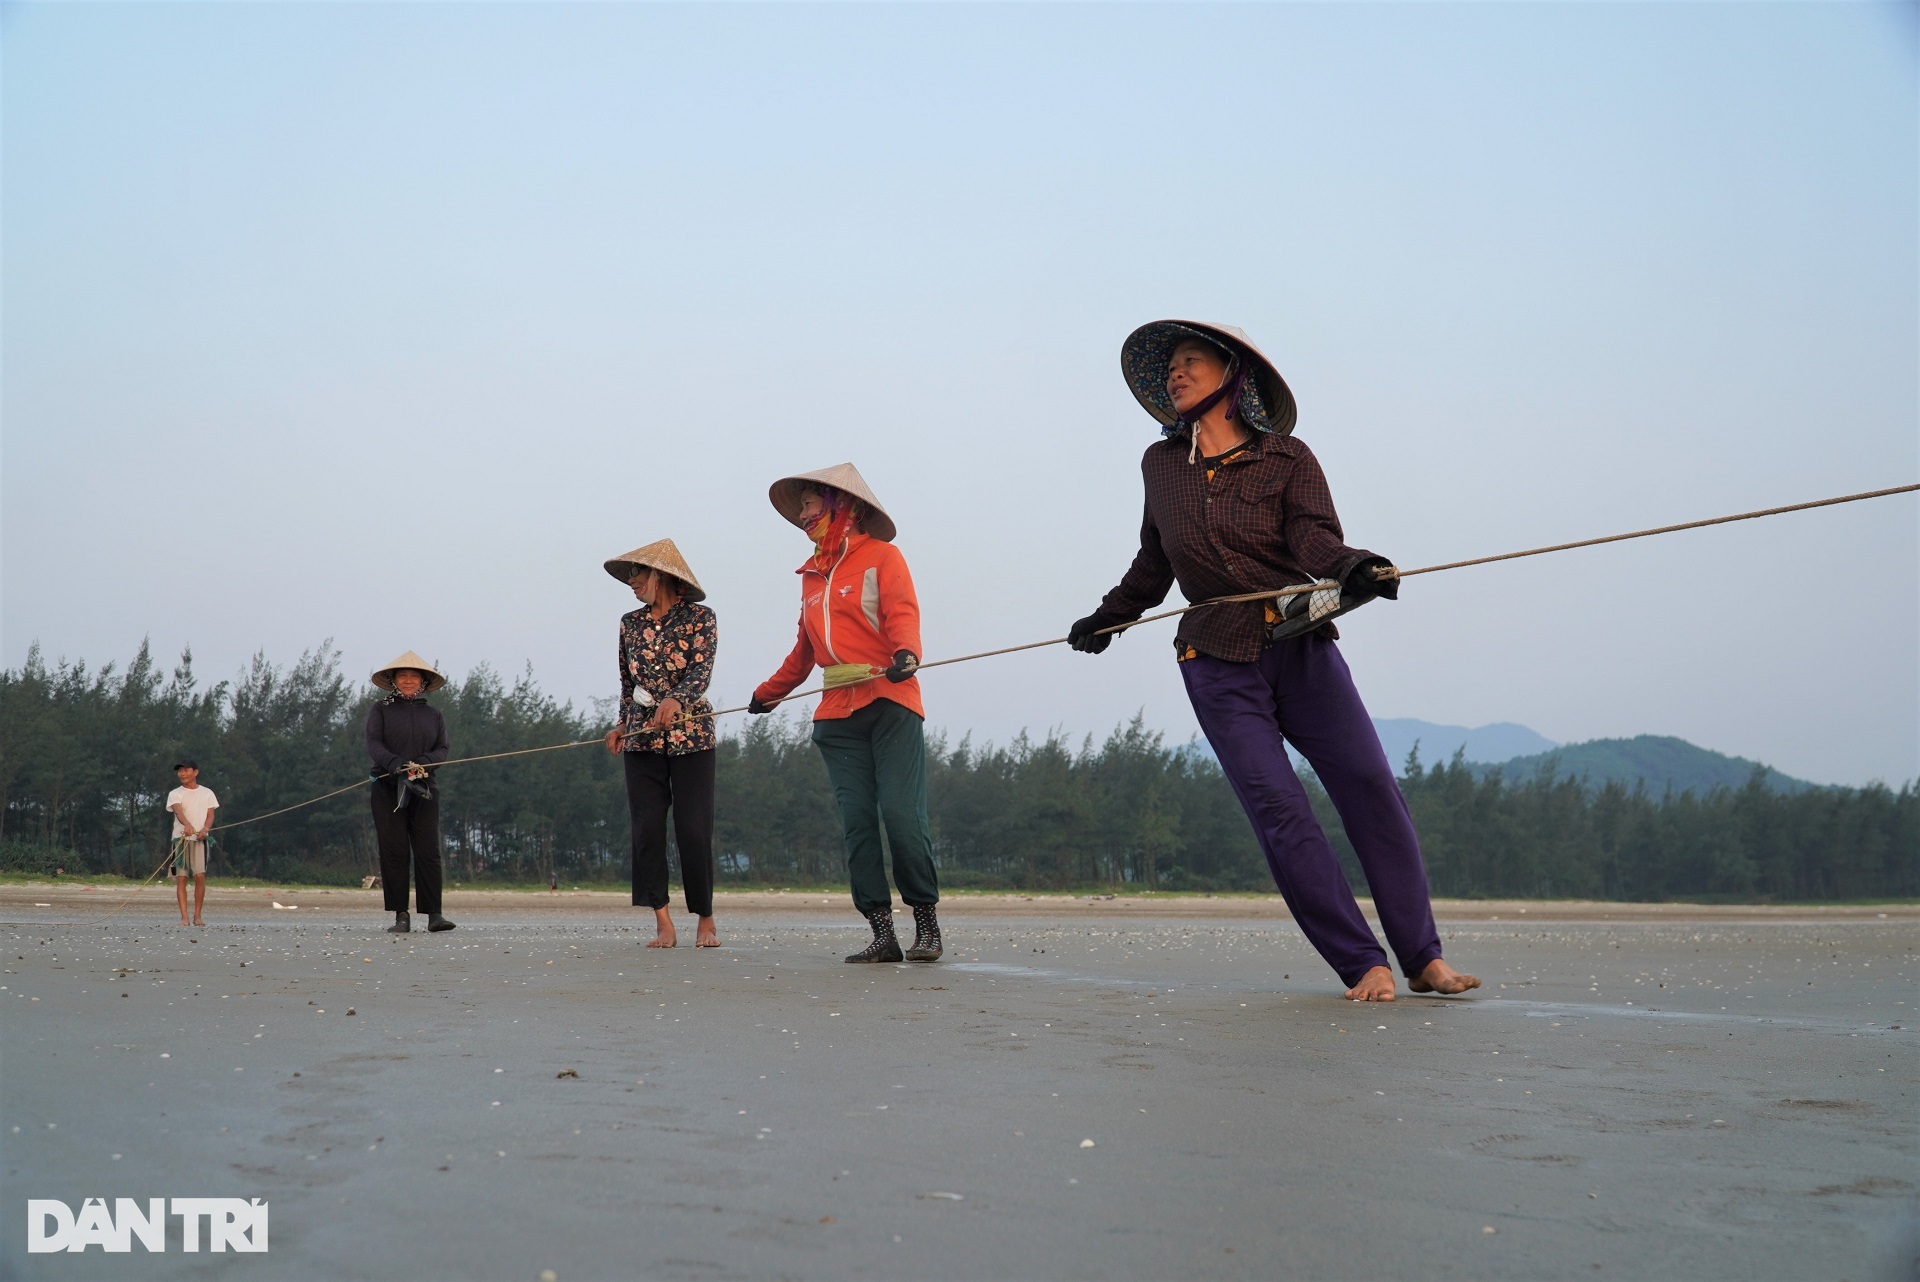 The group of people exercising on the beach also brought back dozens of kilograms of fresh squid - 3